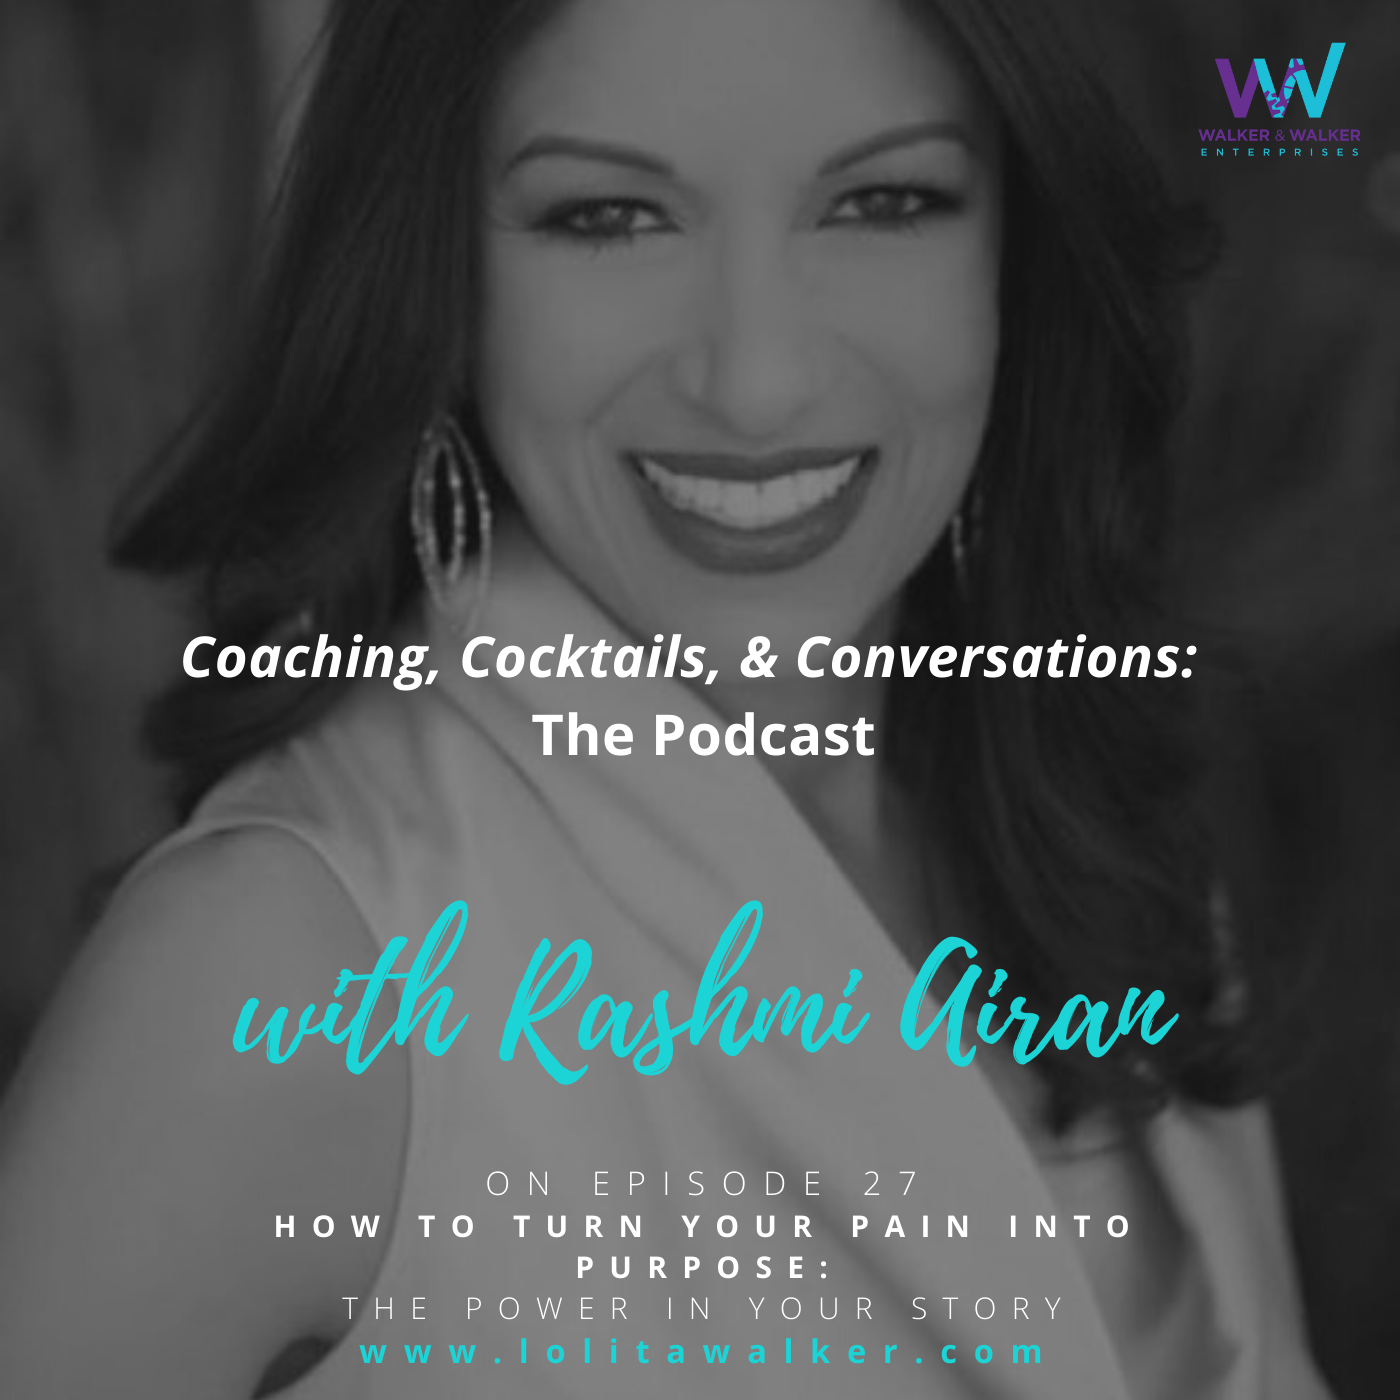 S2E27 - How to Turn PAIN into Purpose: The Power of Your Story with Rashmi Airan